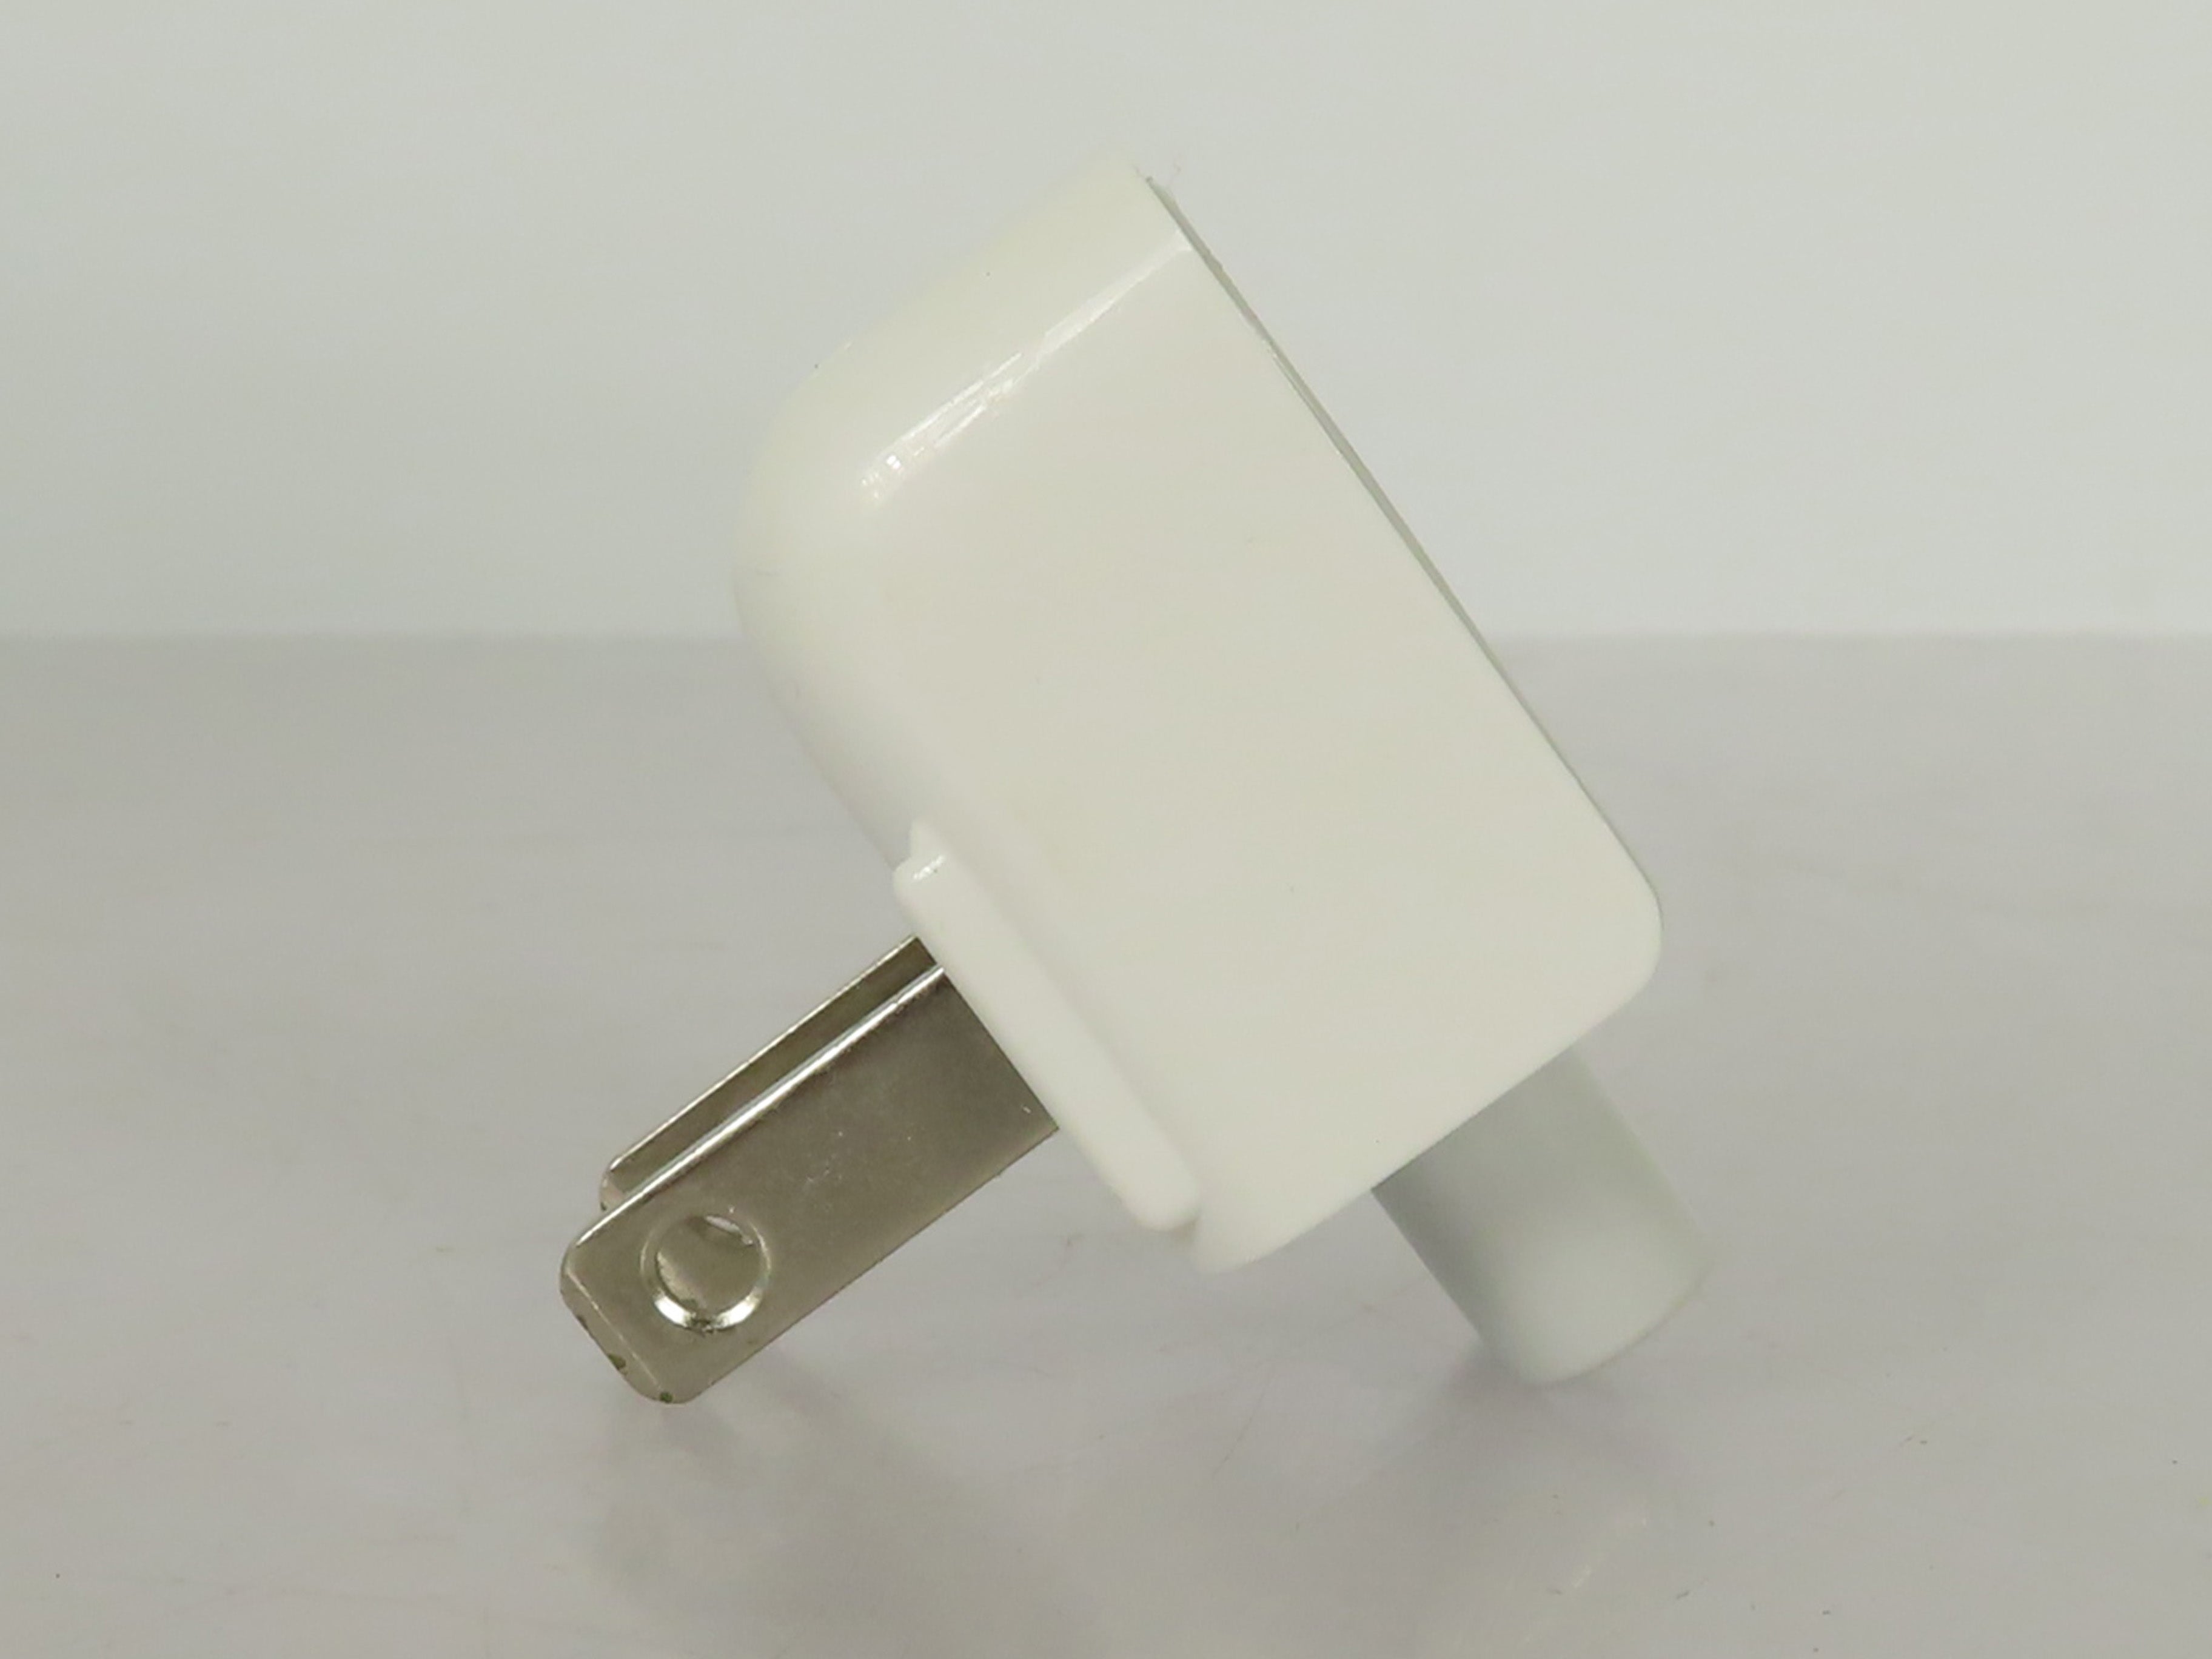 Assorted Two Prong Duckhead Wall Plug for Apple AC Adapter